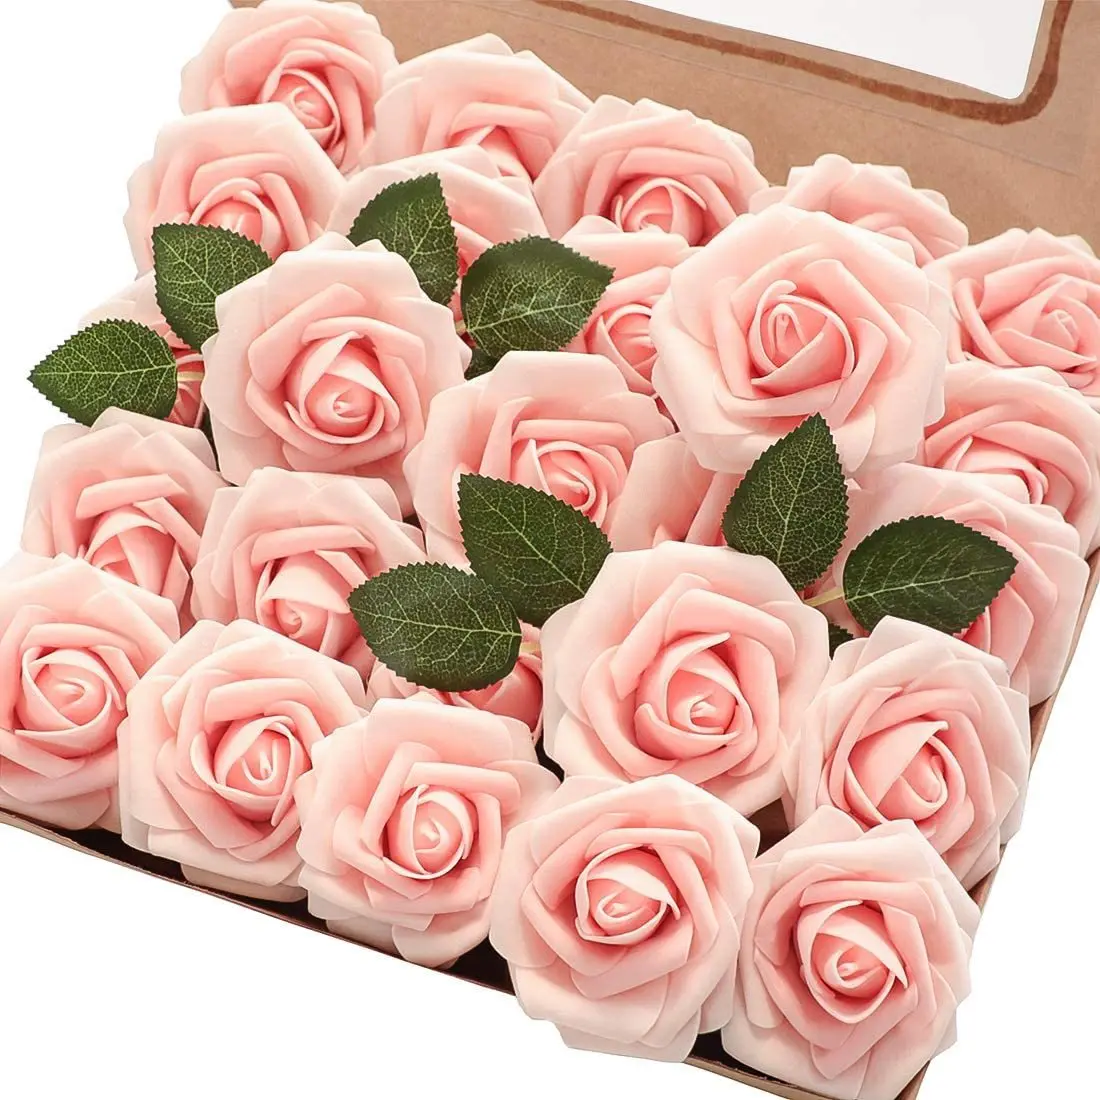 

Artificial Flowers 25pcs Real Looking Foam Fake Roses with Stems for DIY Wedding Bouquets Bridal Shower Centerpieces Party